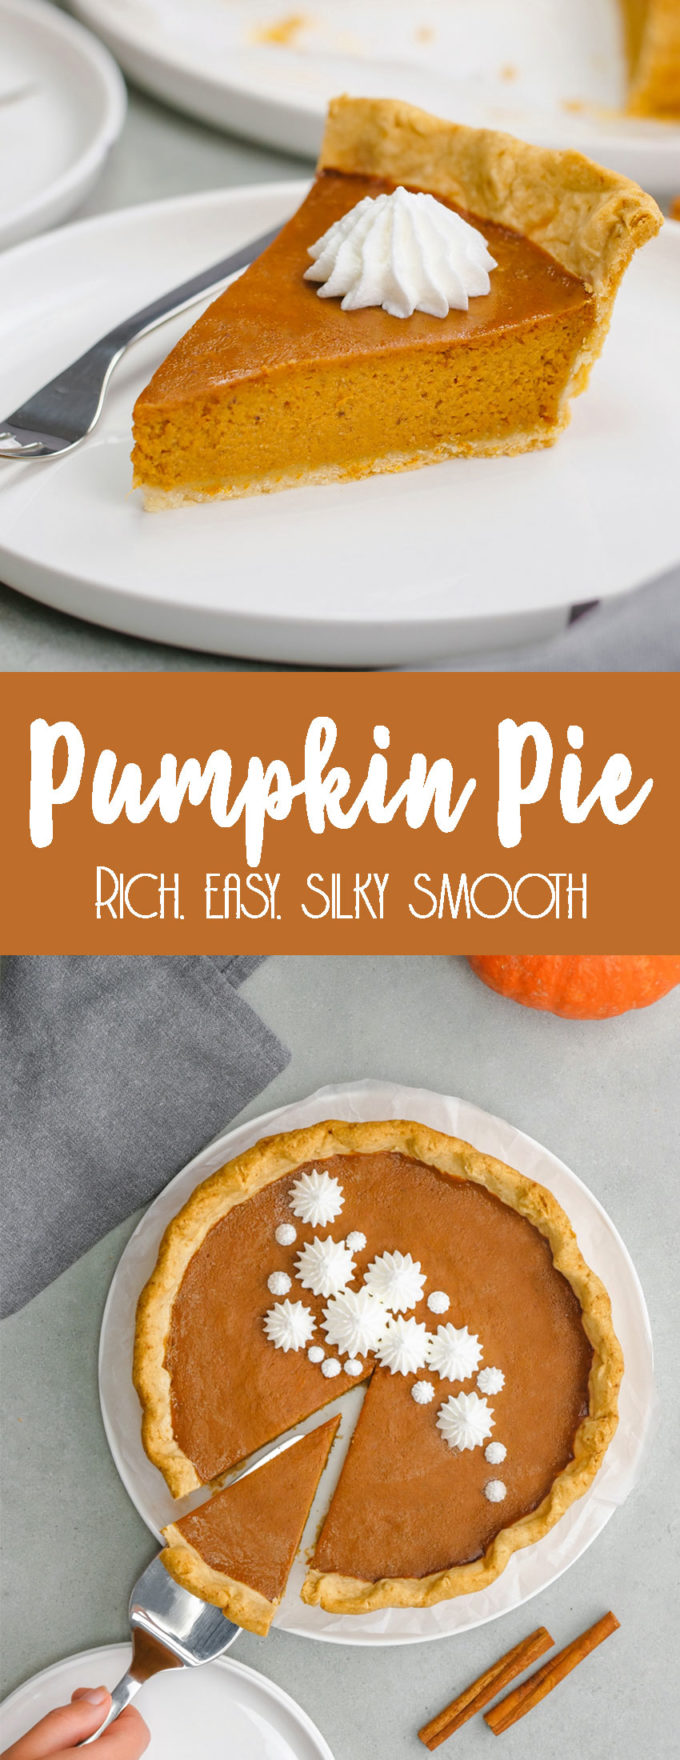 Easy to make, richly seasoned, and silky smooth pumpkin pie. 